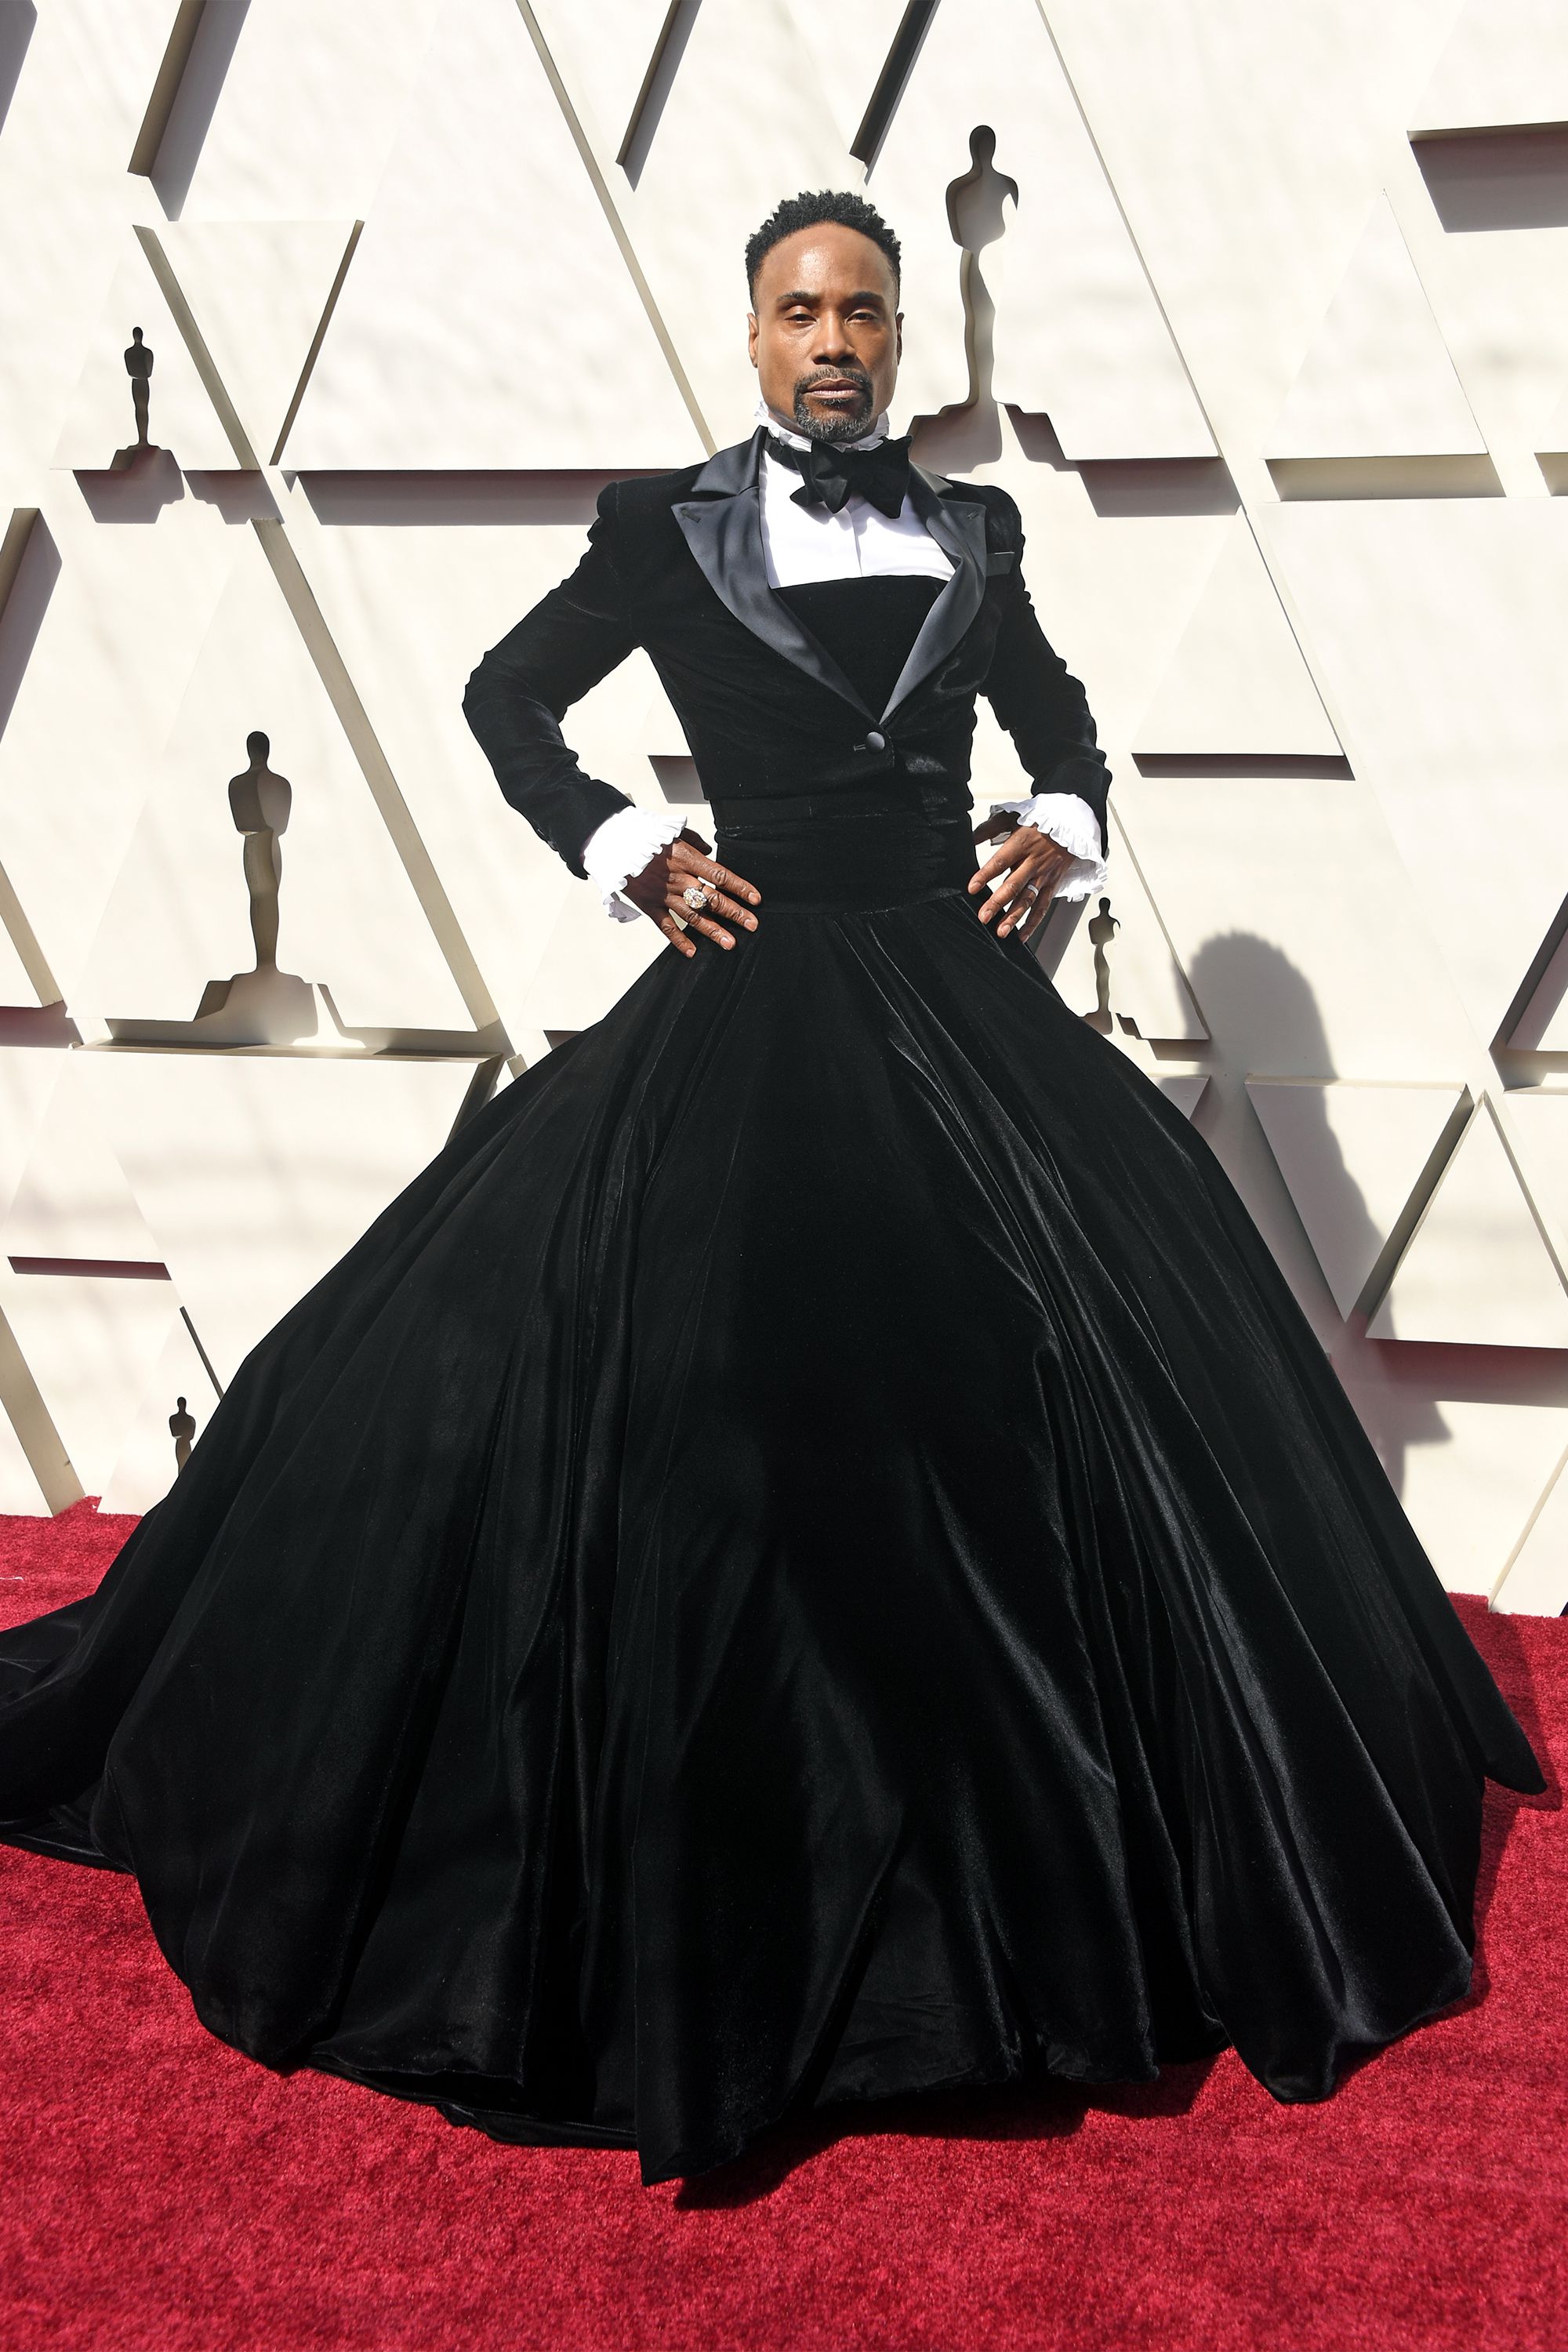 The Oscars 2019 Drowned In Frills, Fairyfloss And Ruffles!